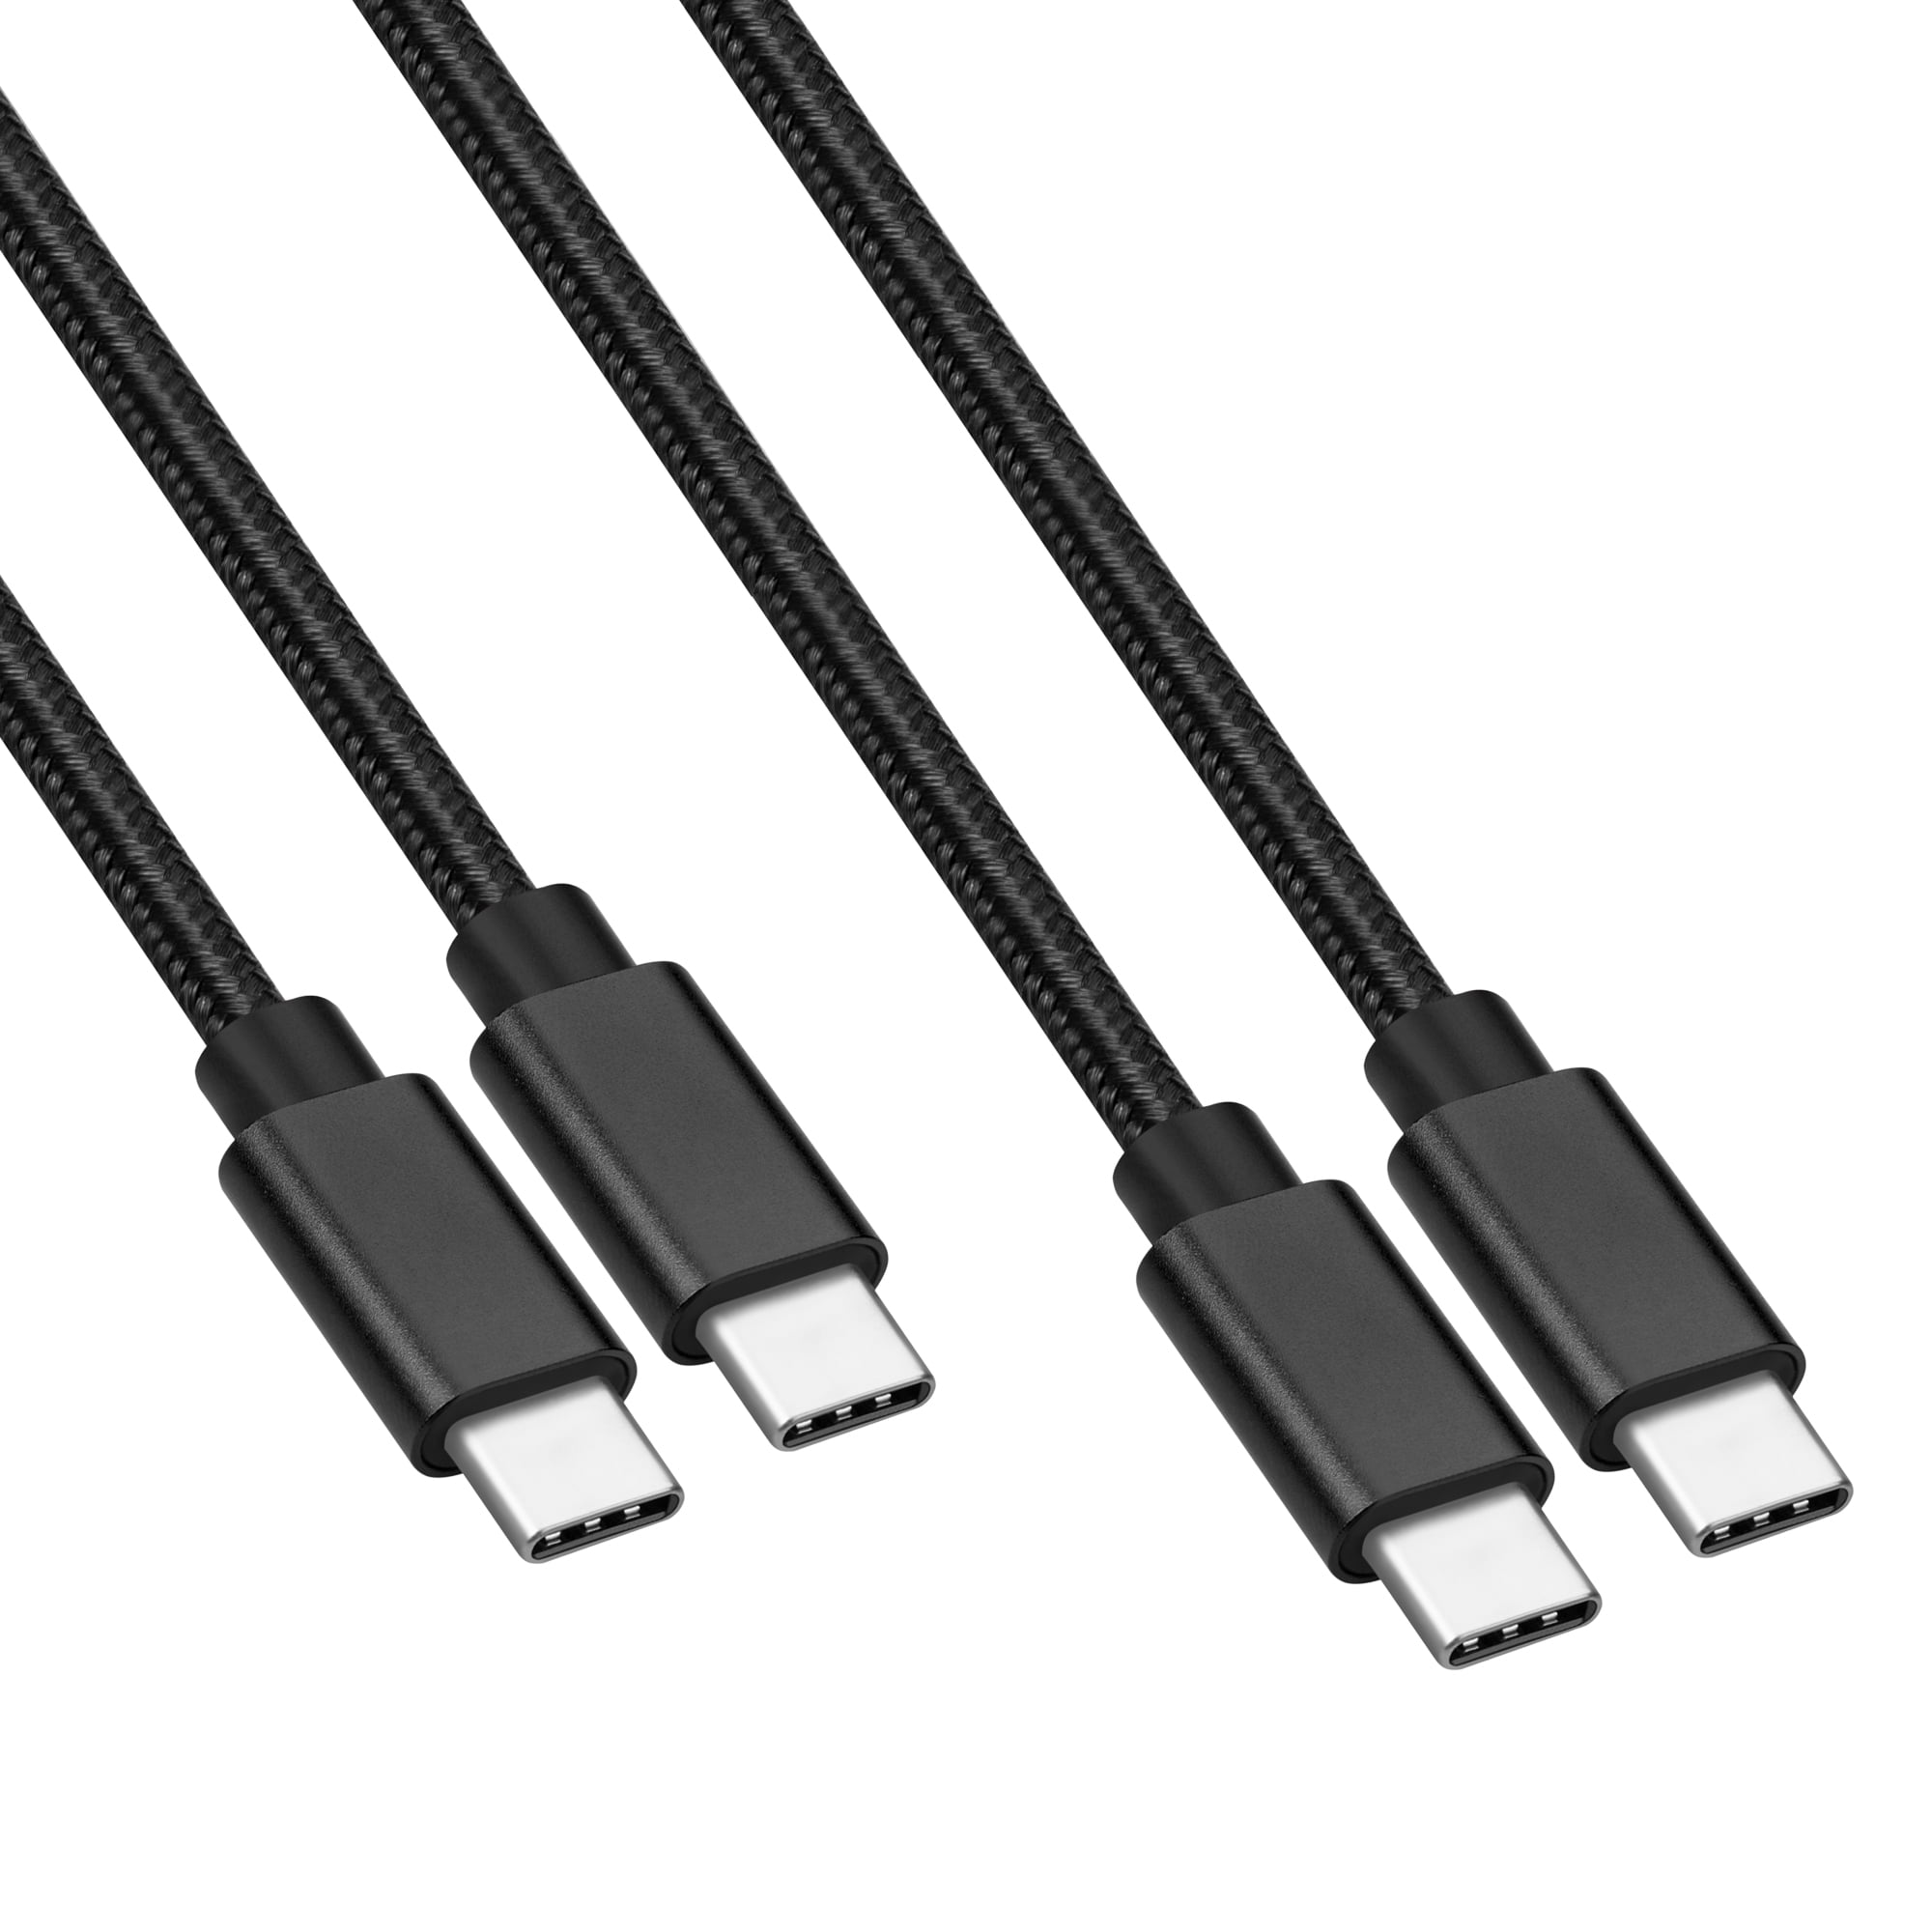 Zakje kompas vals Mimifly USB C to USB C Charger Cable 60W 15FT, 2-Pack 3A USB Type C PD Fast  Charging Cable for Samsung Galaxy S21, Switch, Pixel, LG (Black) -  Walmart.com